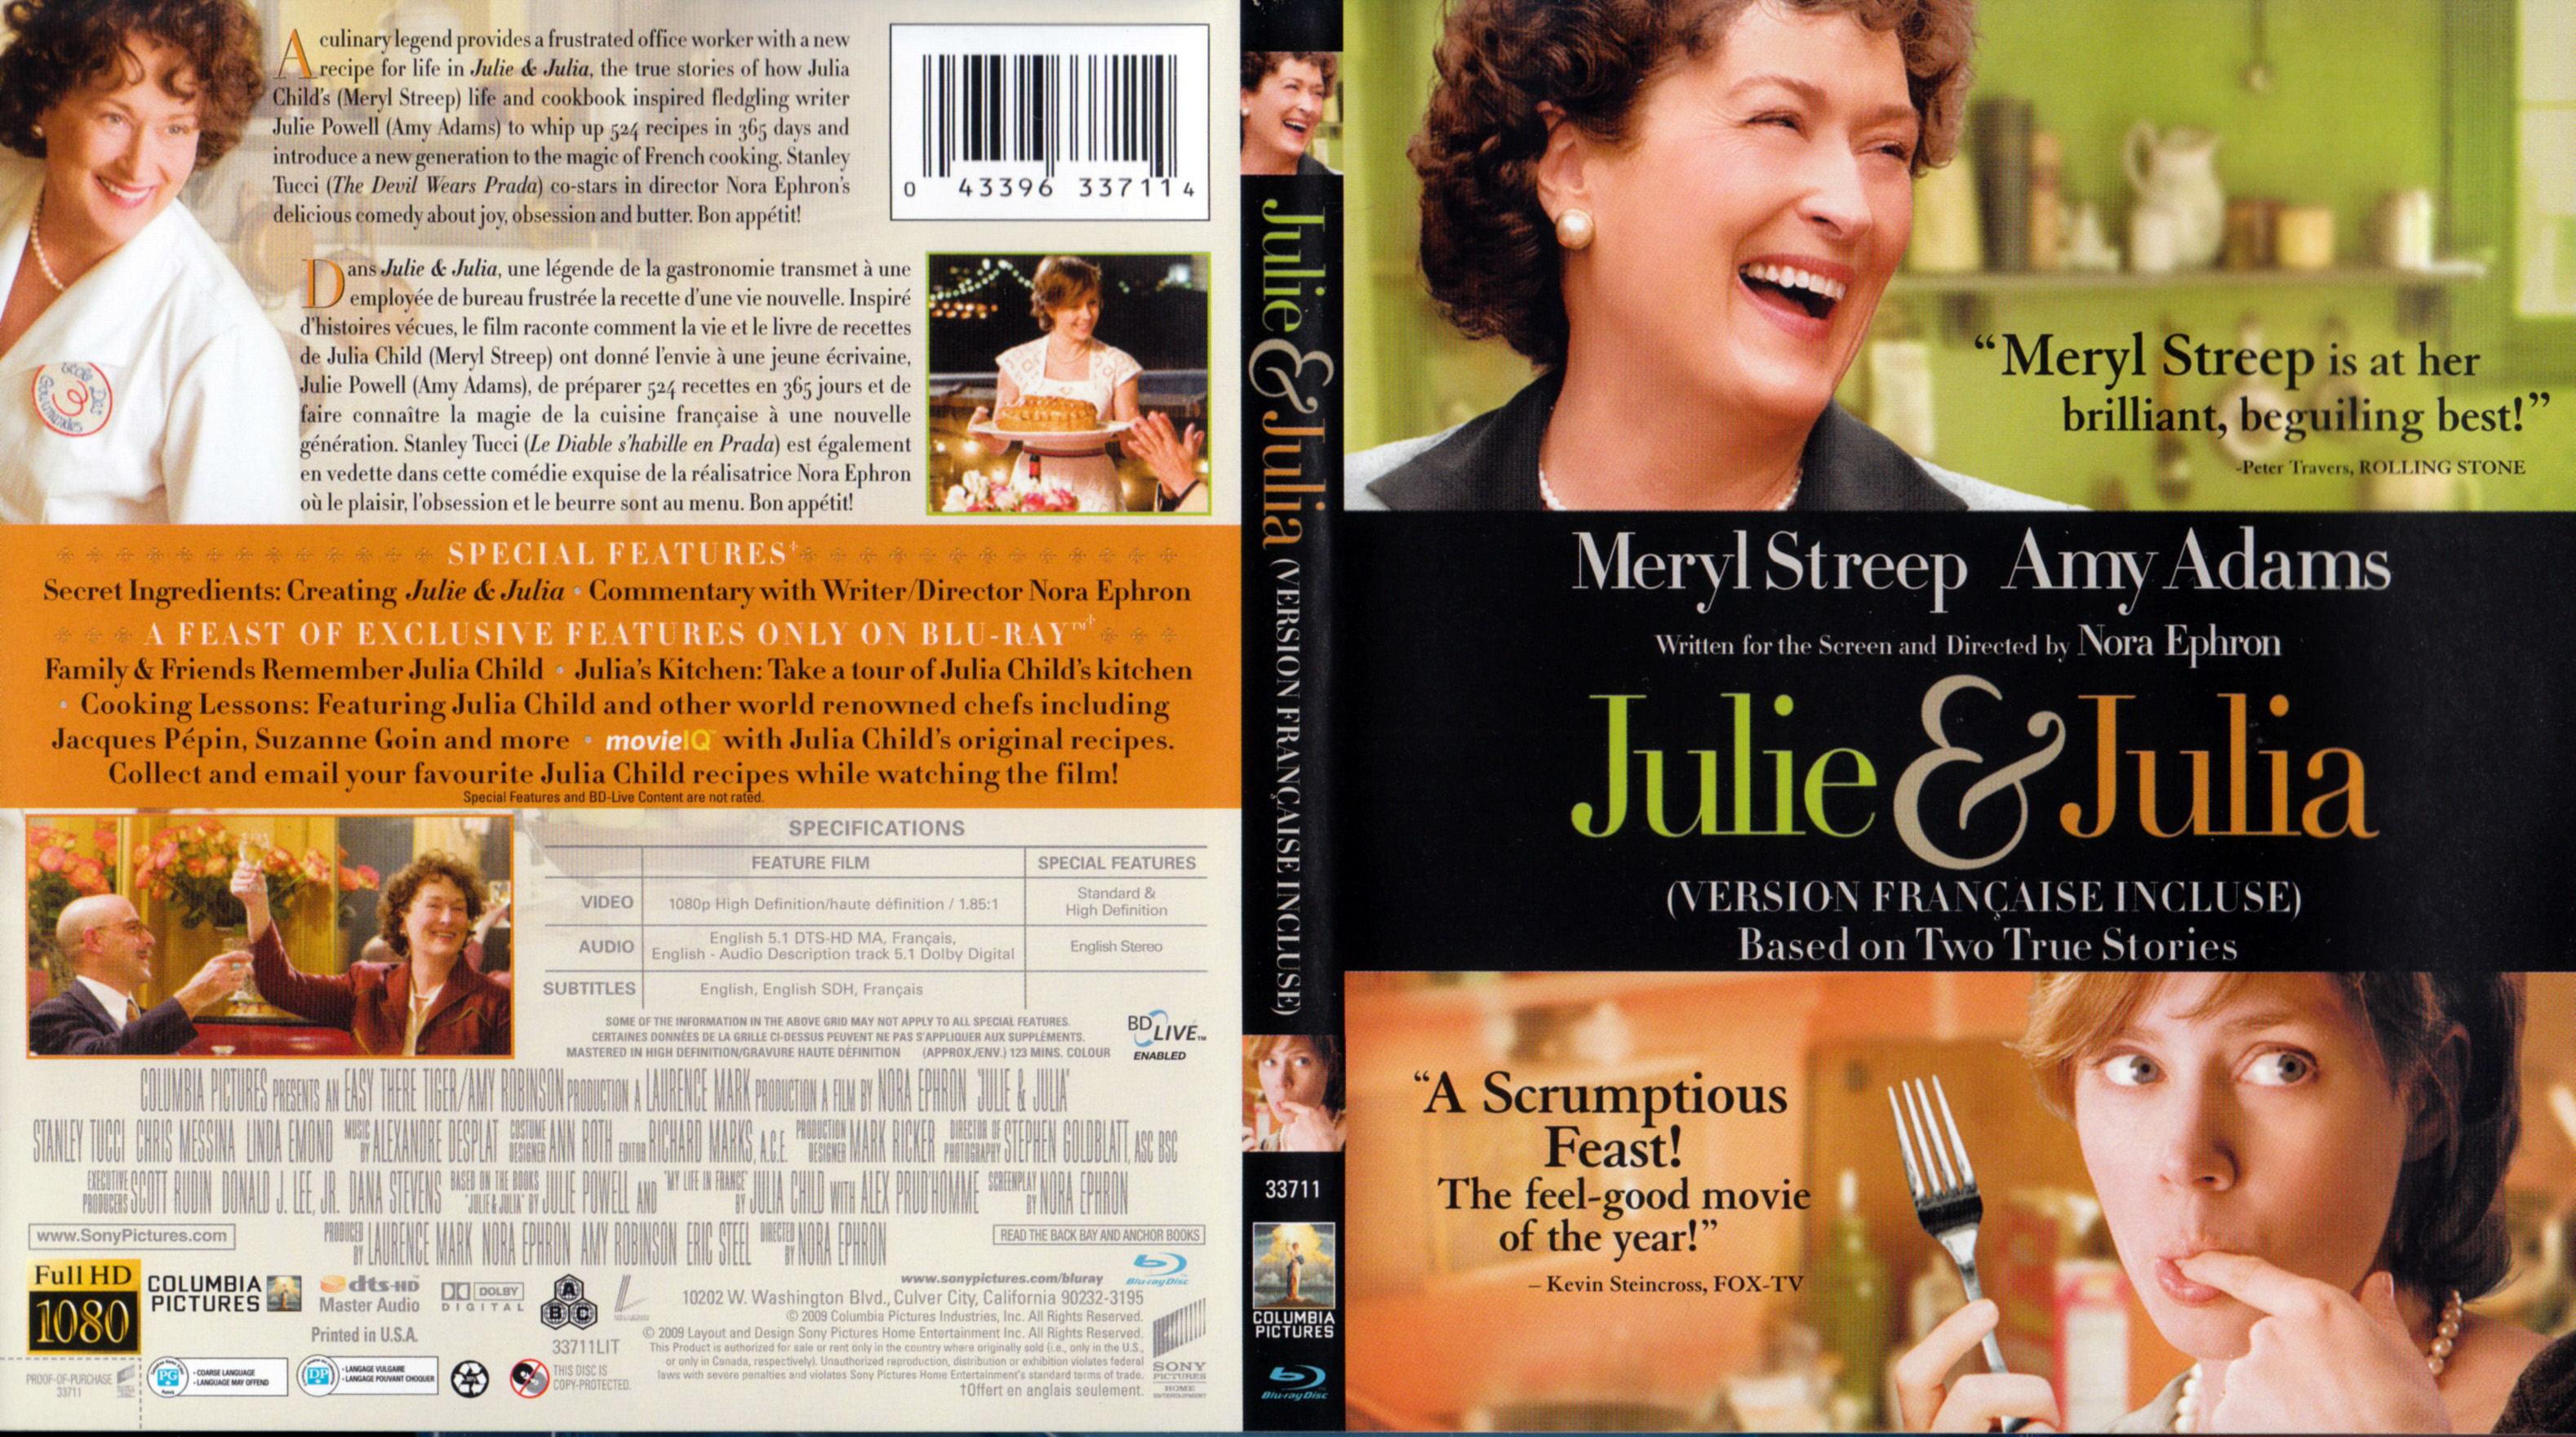 Jaquette DVD Julie and Julia (BLU-RAY) (Canadienne)